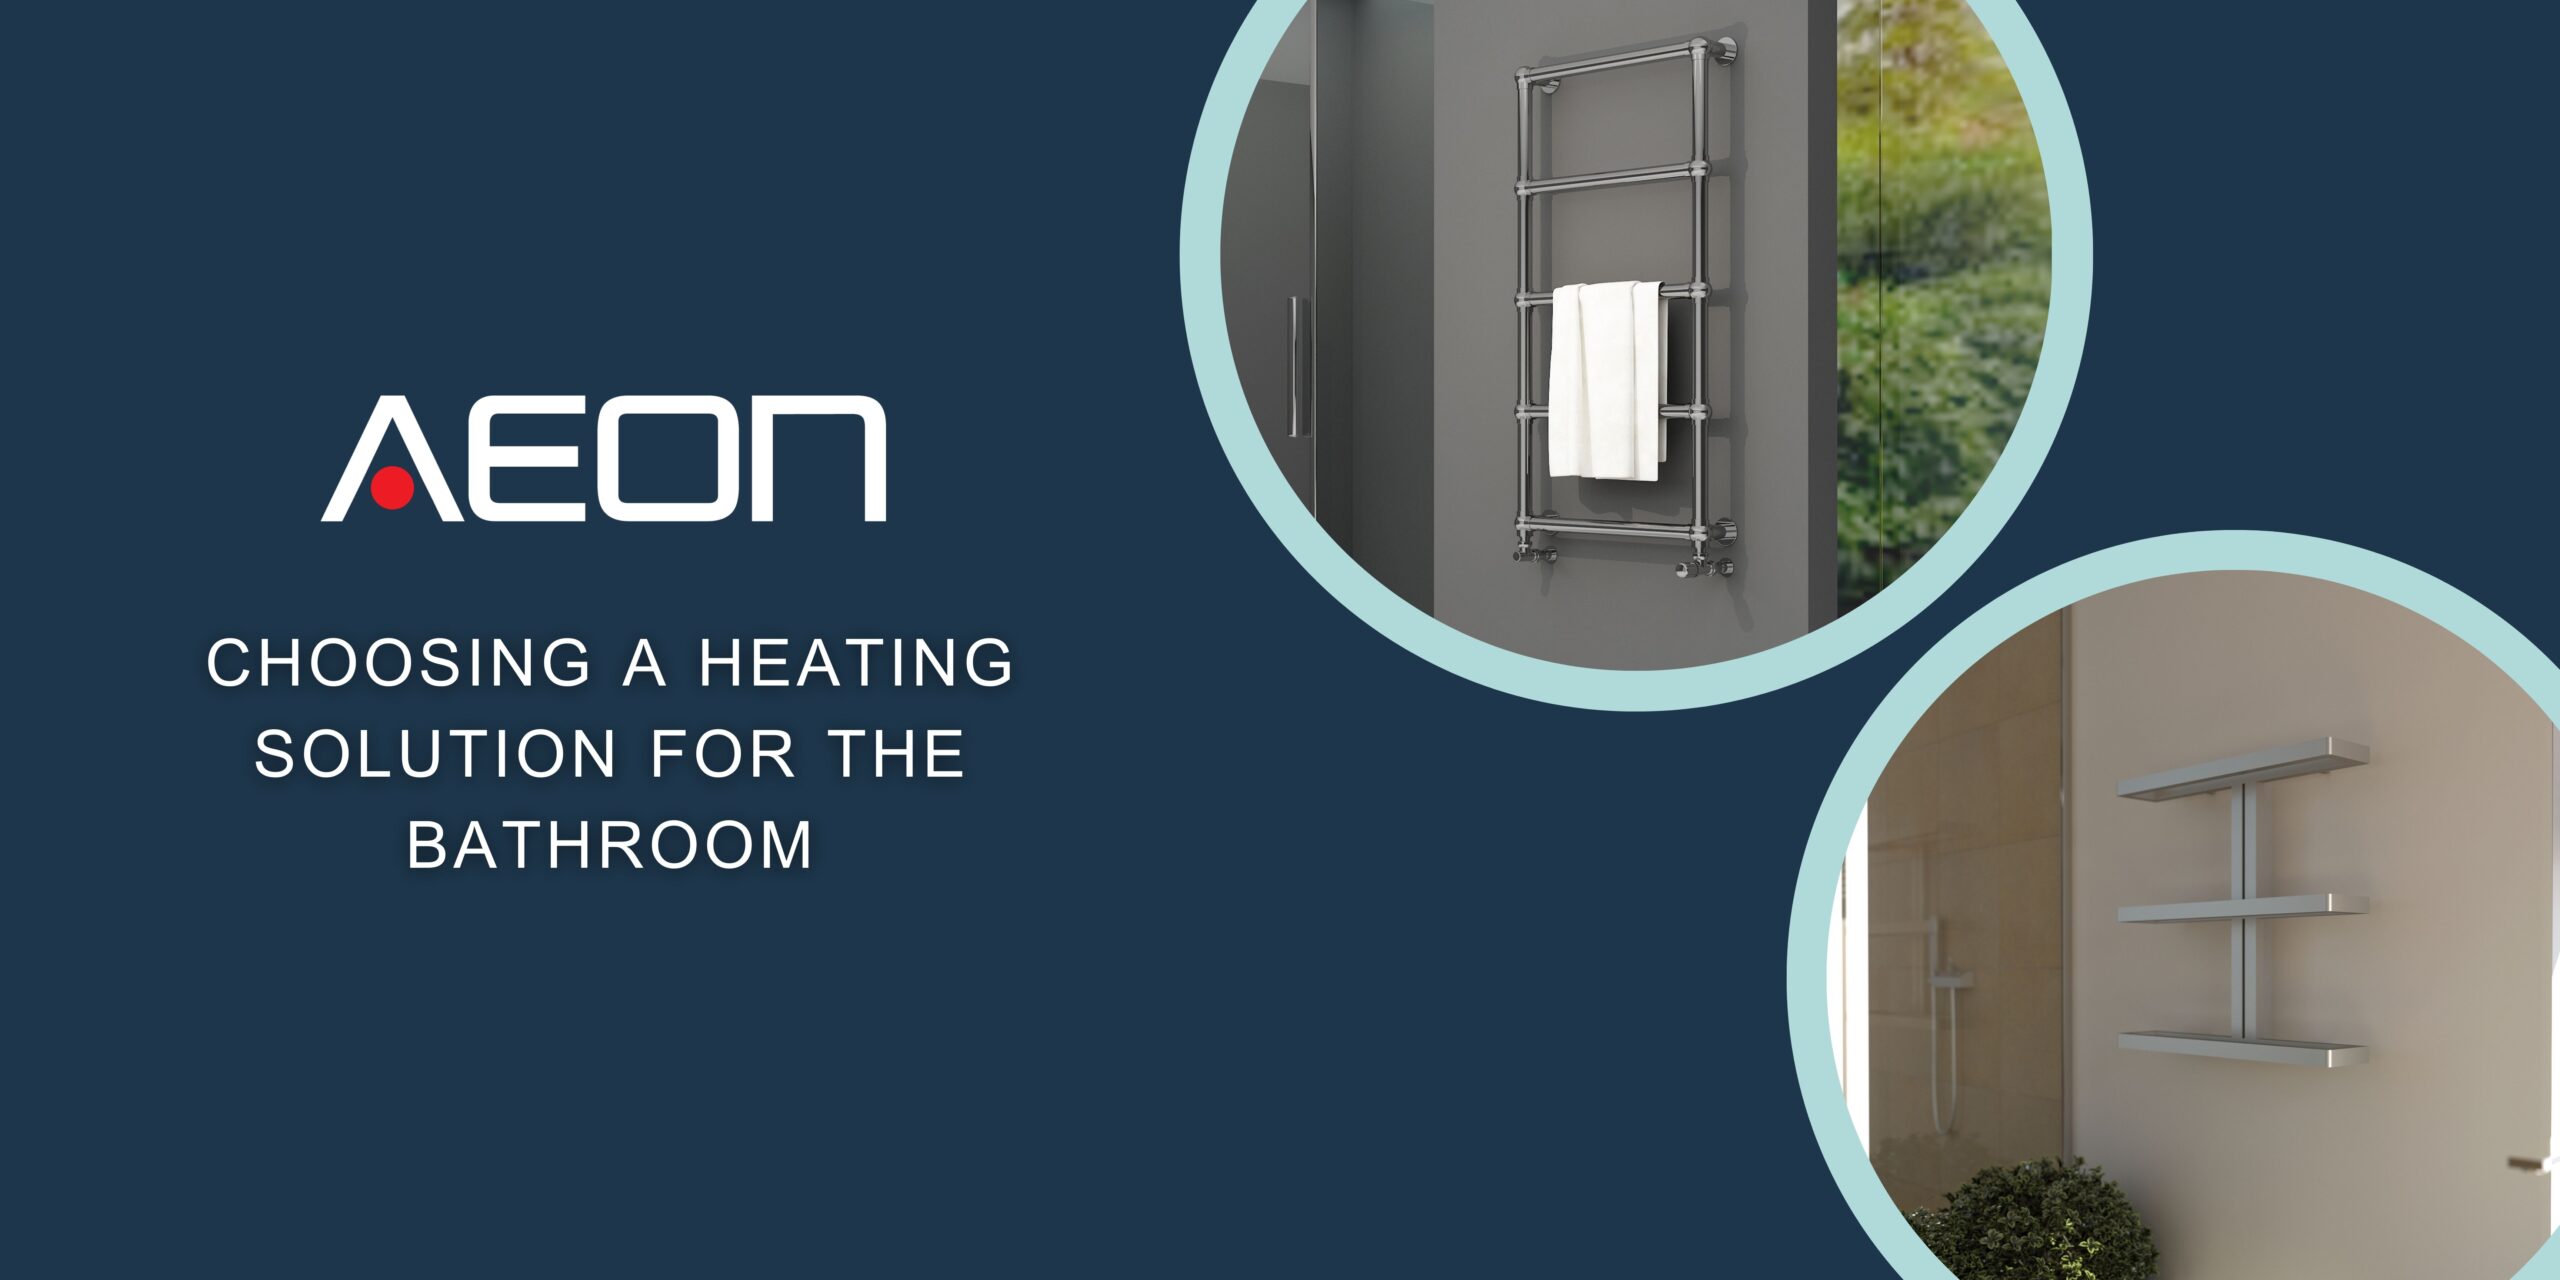 CHOOSING A HEATING SOLUTION FOR THE BATHROOM